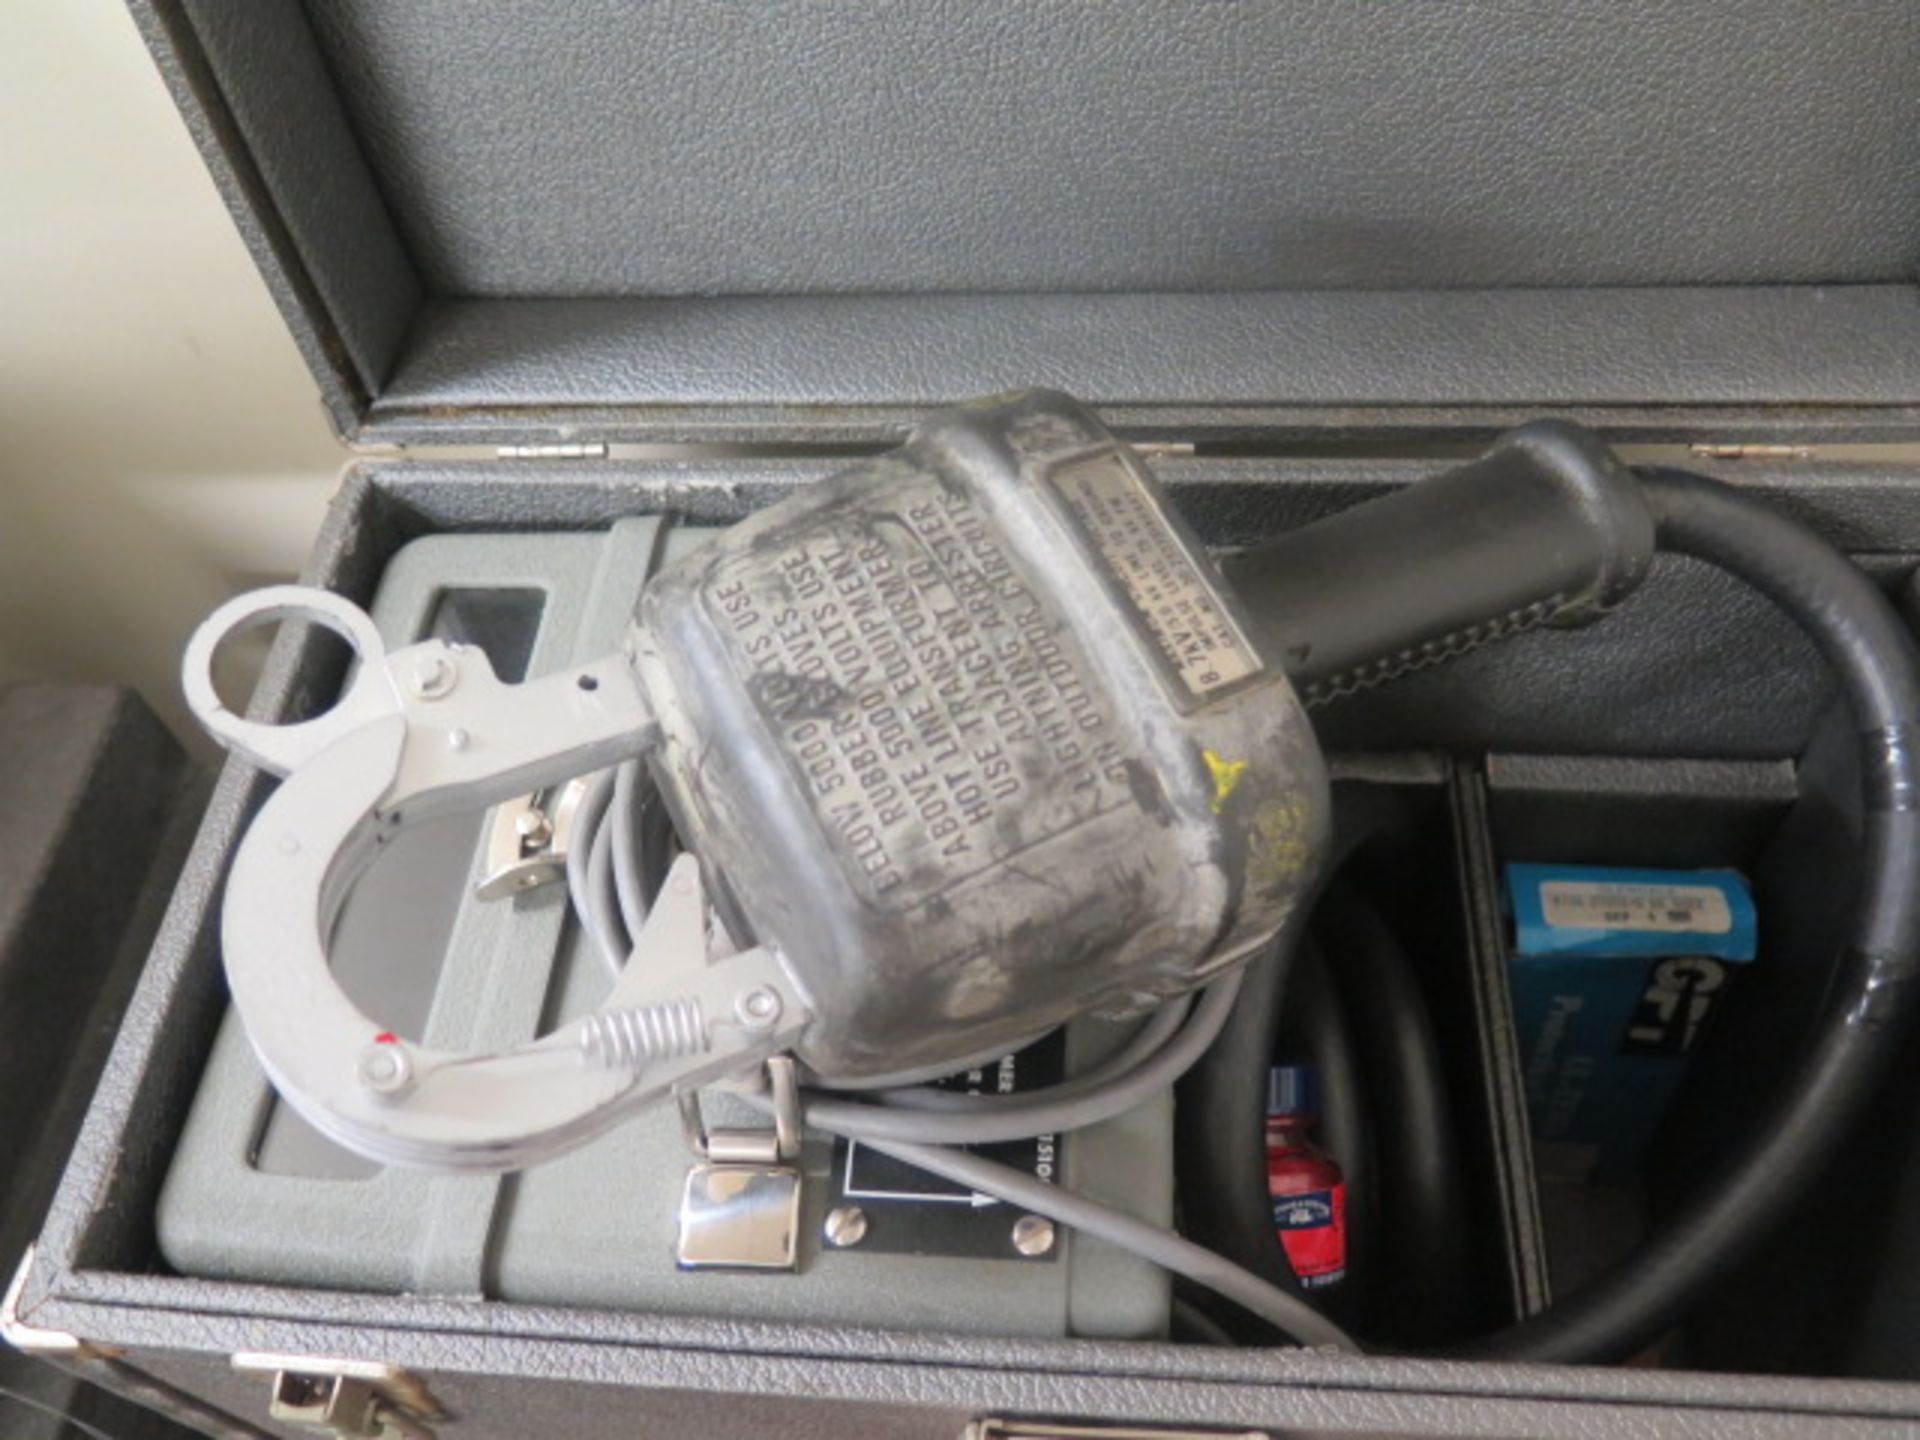 GE 8.7 kVA Clamp-On Volt/Amp Meter w/ Chart Recorder - Image 2 of 4